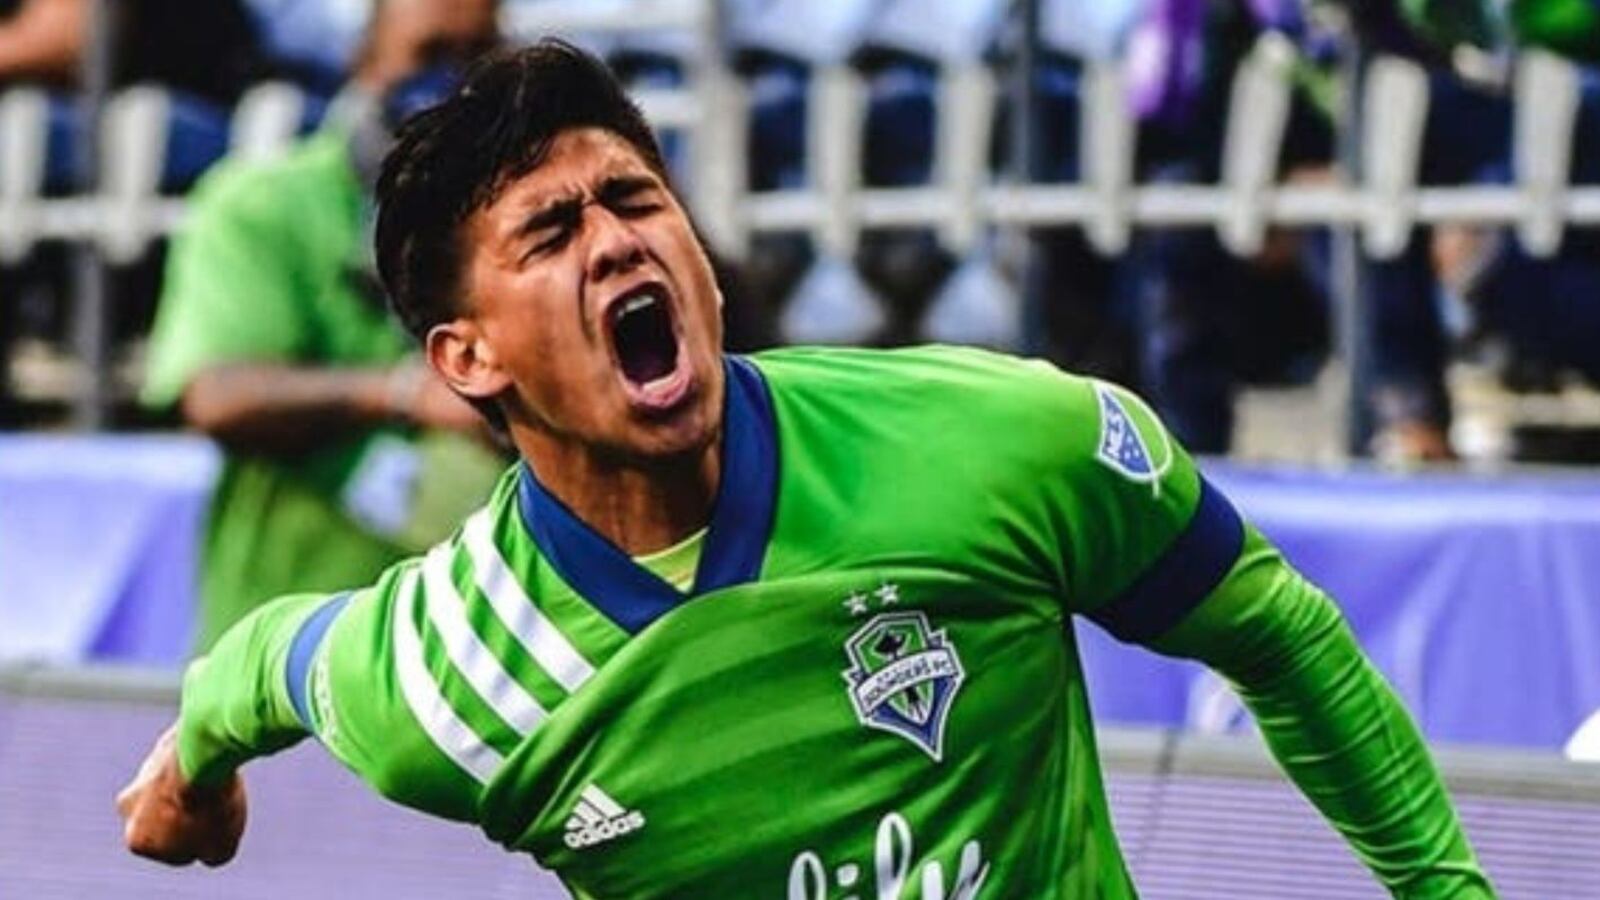 The MLS player who has a big problem for misuse of social networks